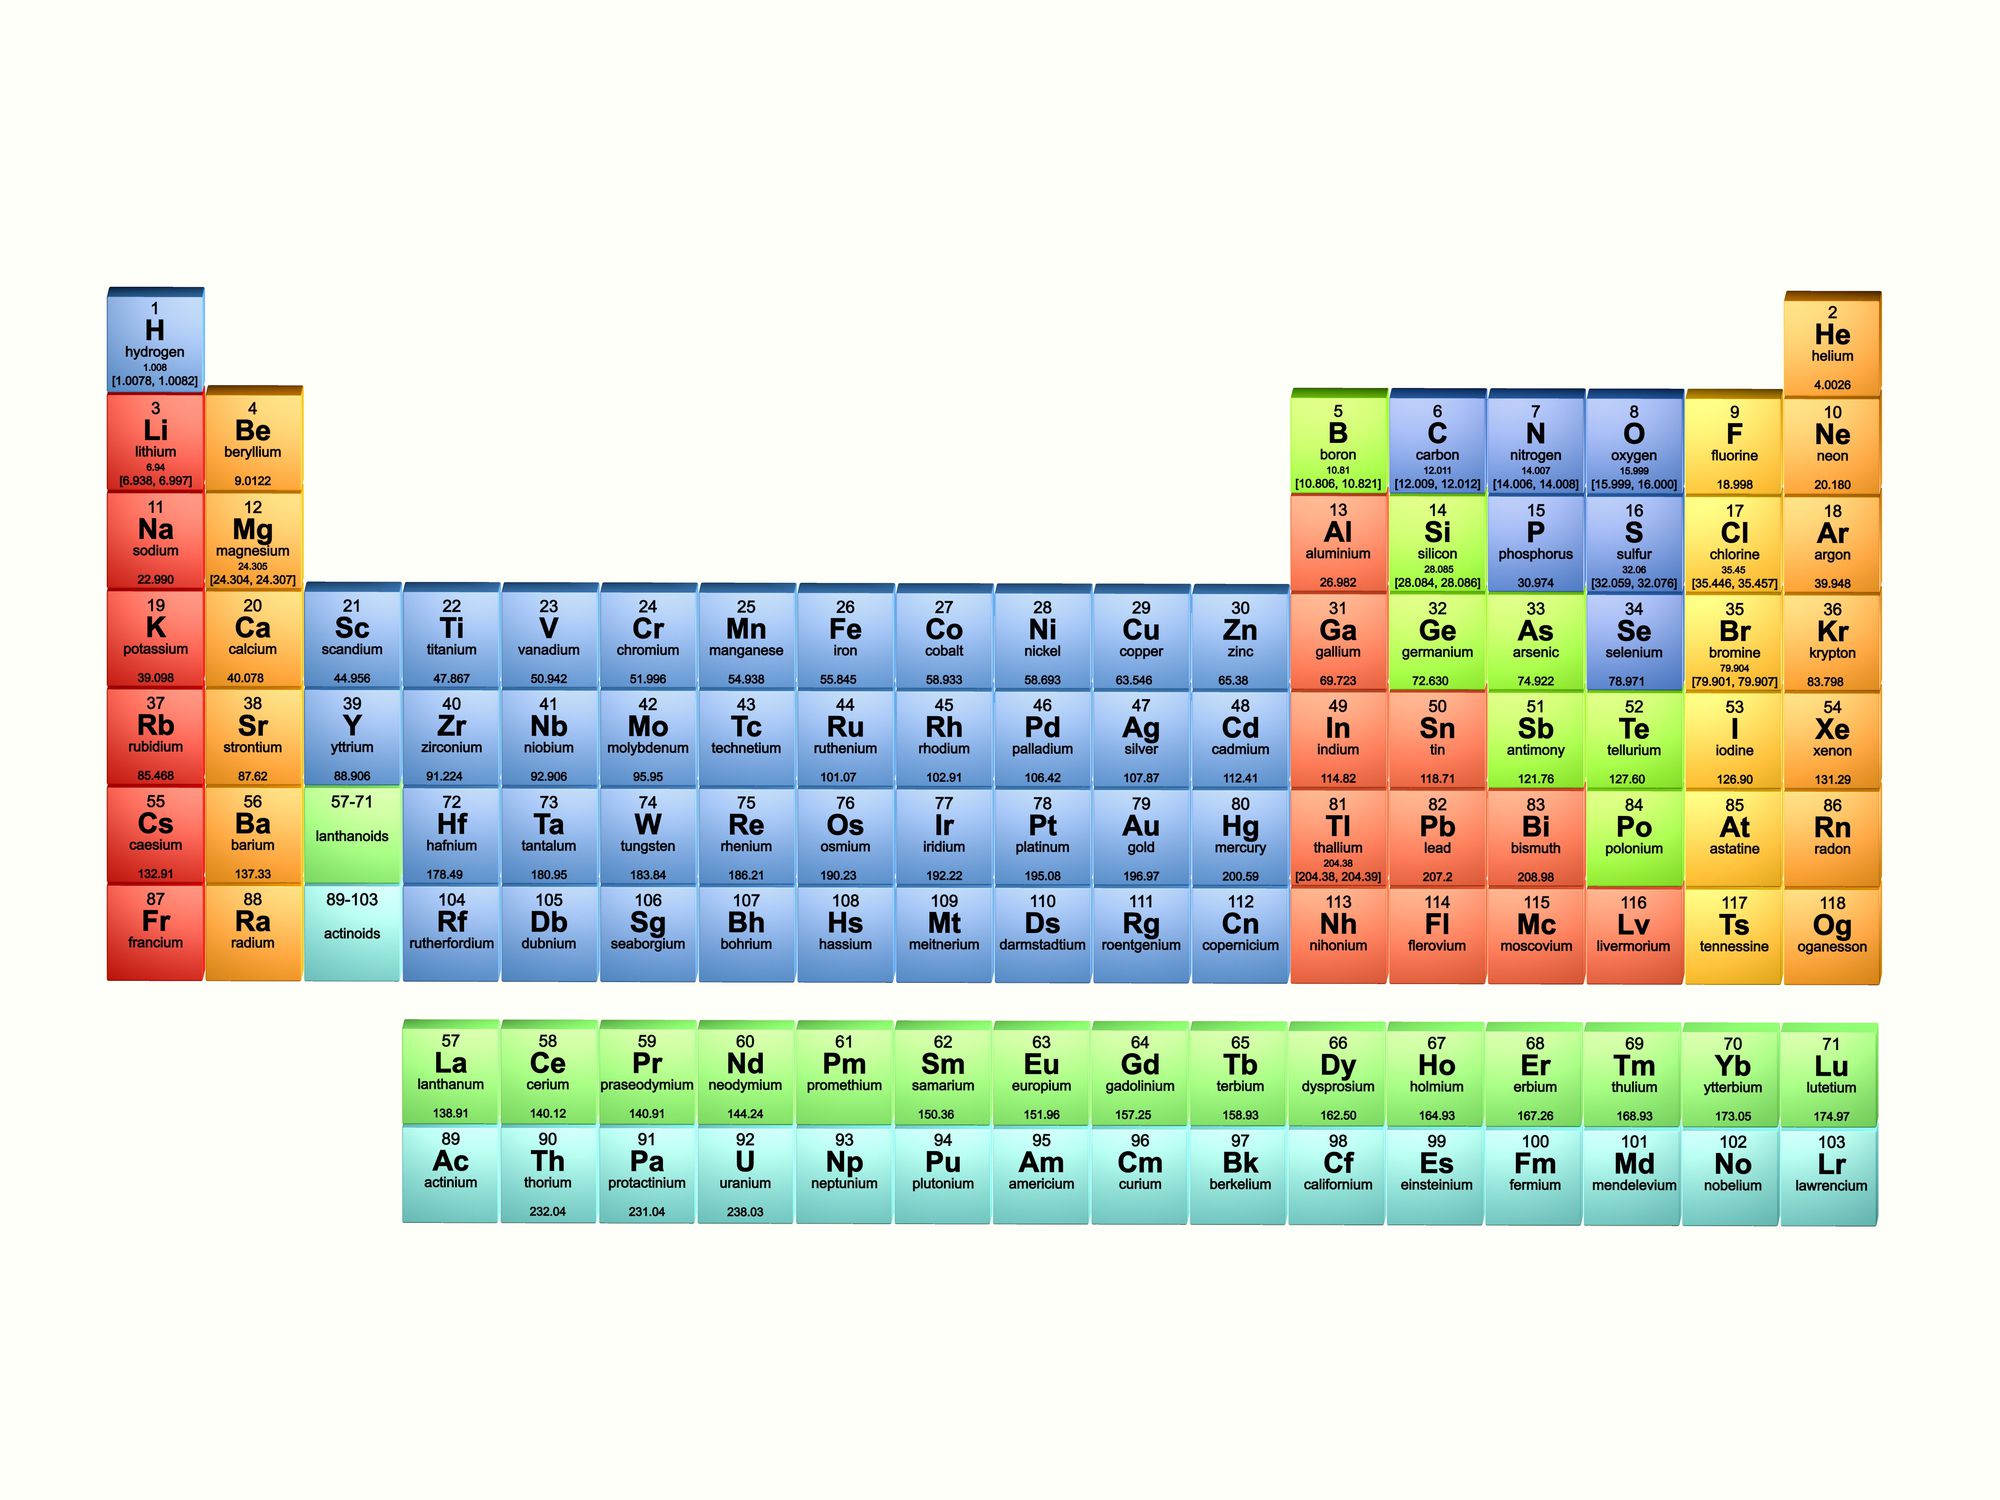 a visual representation of the elements grouped by similar properties